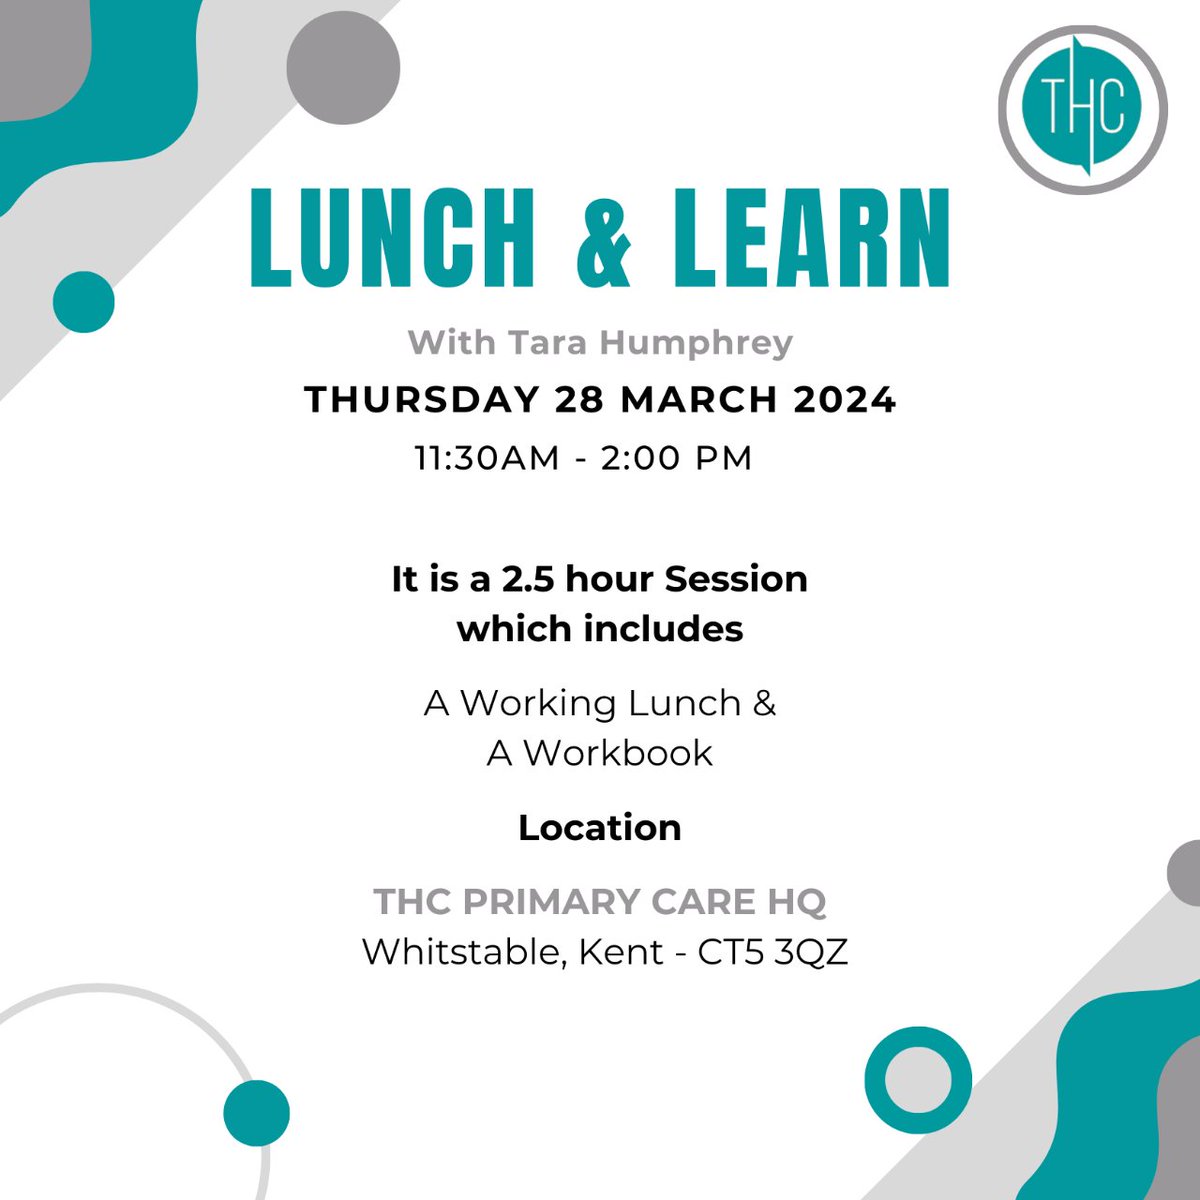 Are you a part of a #PCN Management team and based in the South East of England? We have a lunch & learn session available in March at our HQ in Whitstable, Kent. To find out more - check out our page below 🤗 thcprimarycare.co.uk/lunch-and-learn #primarycare #training #primarycarenetwork